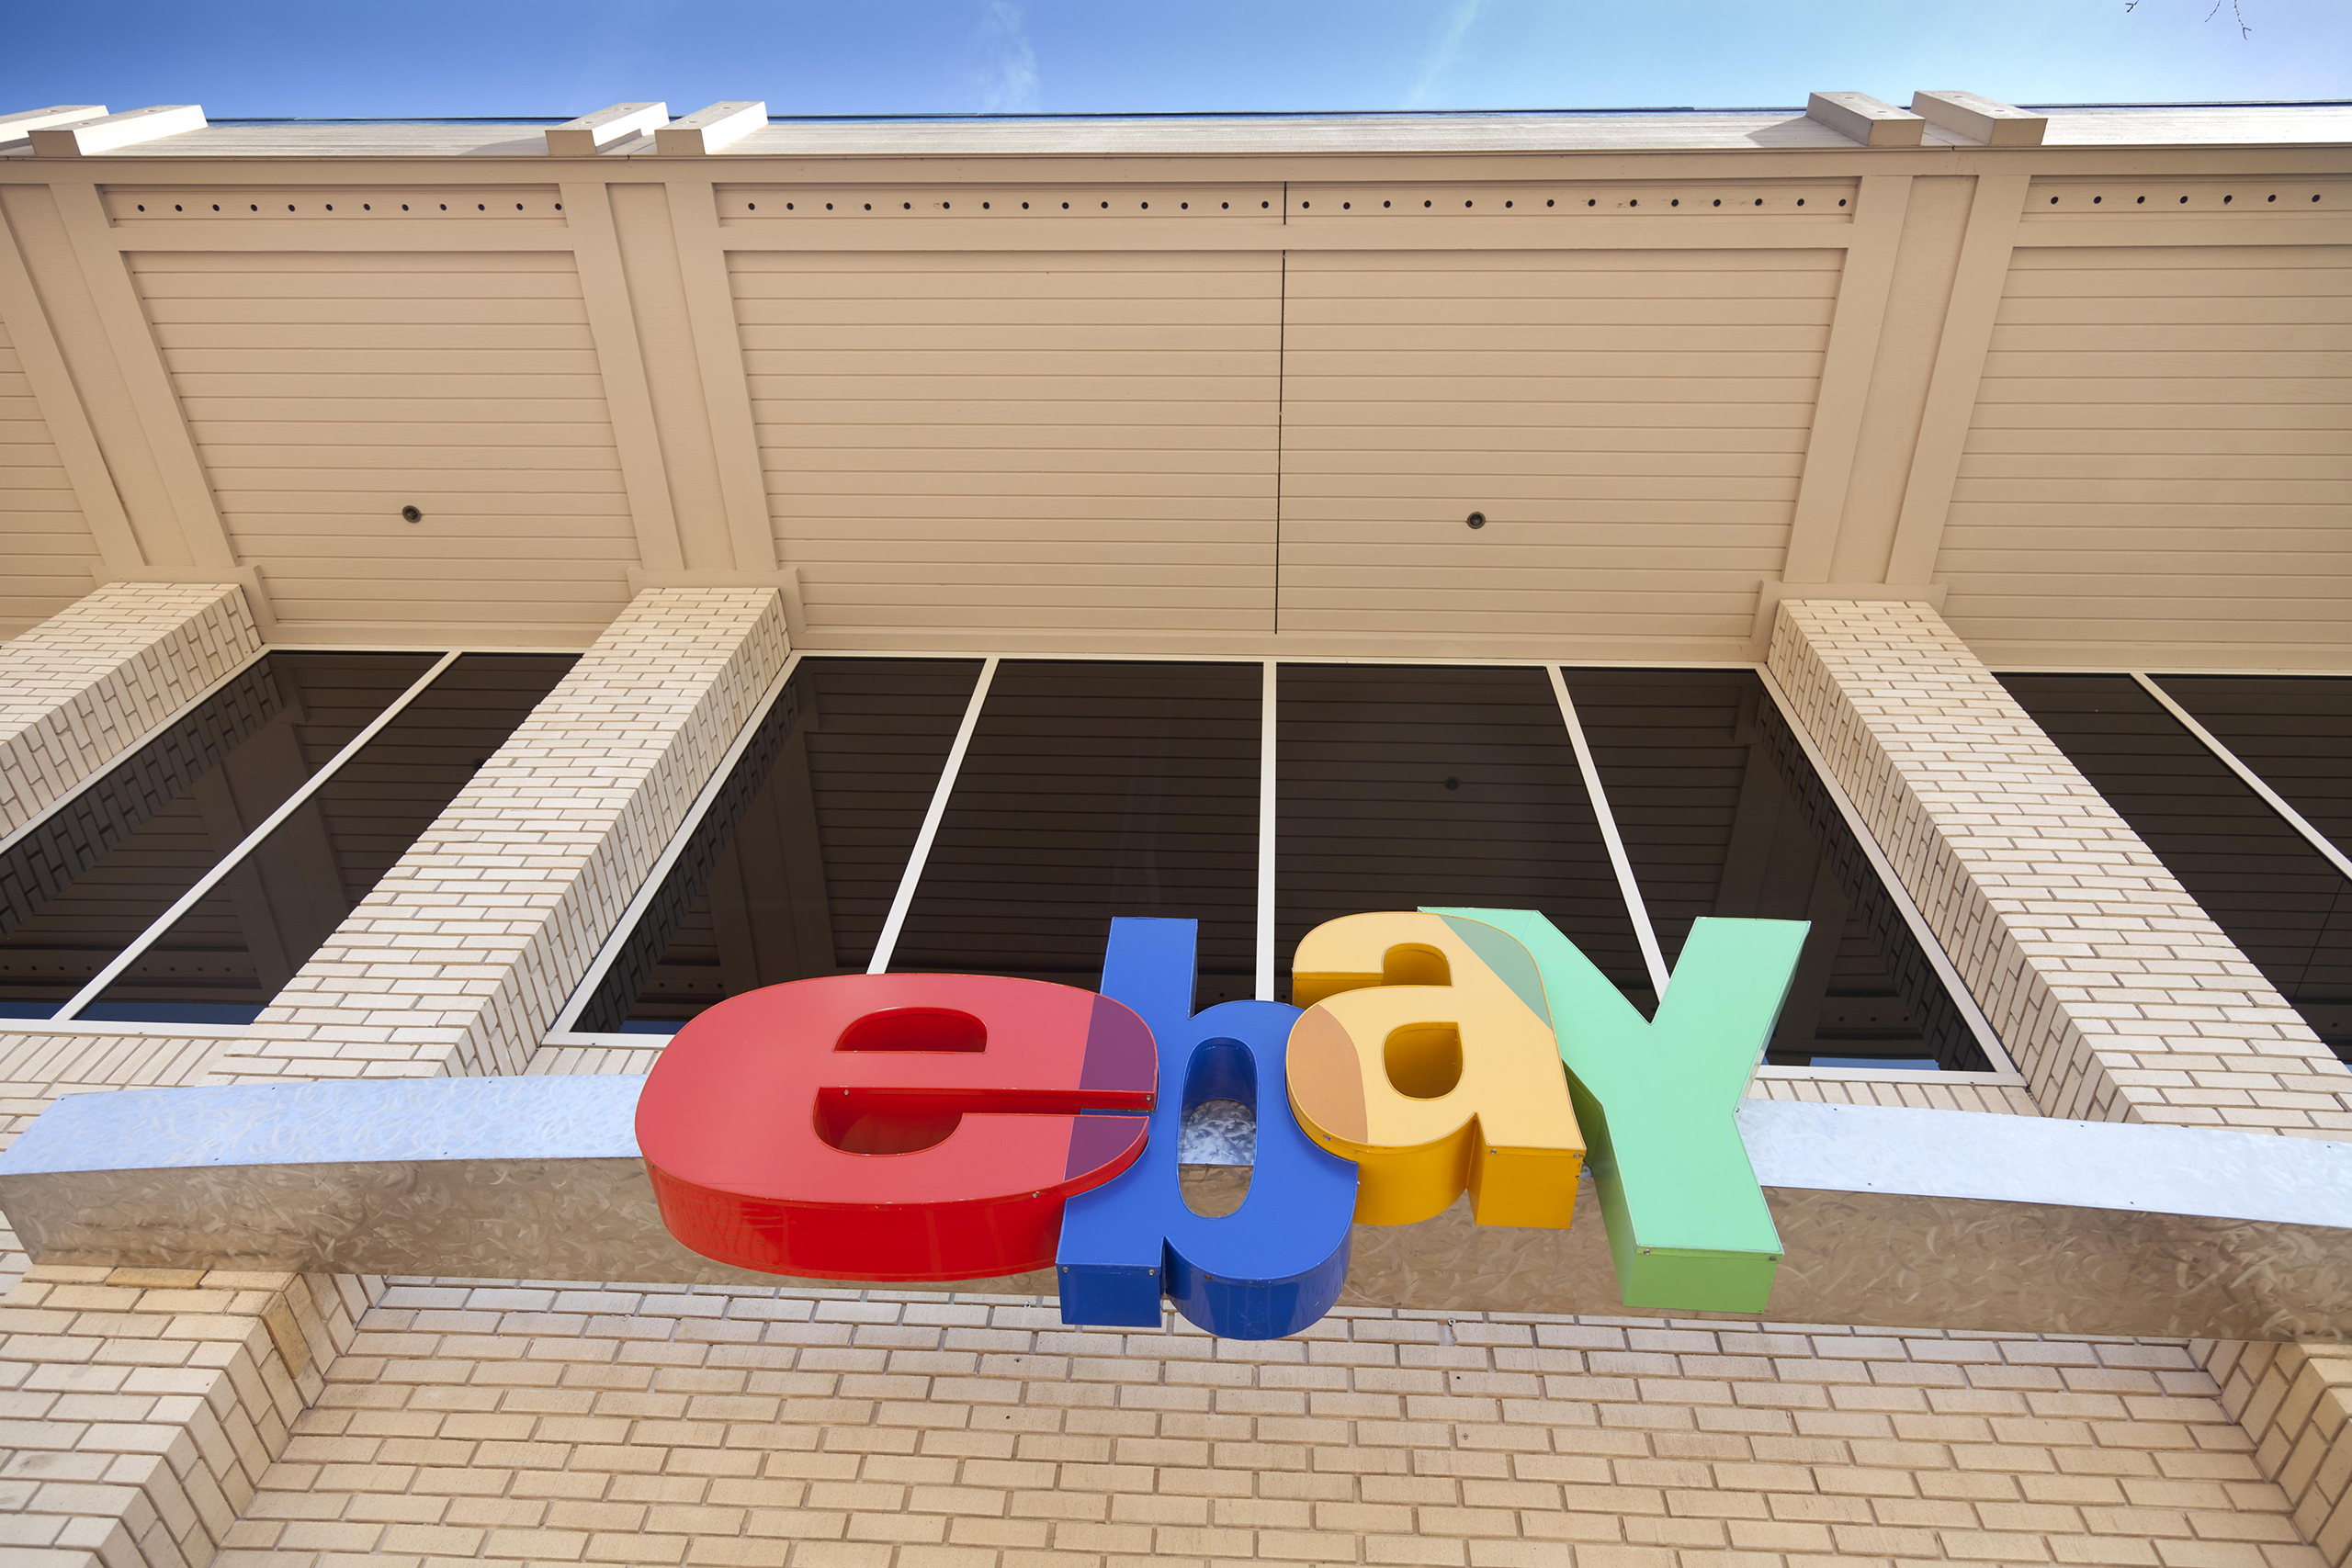 ebay_study-how_to_build_trust_and_improve_the_shopping_experience.jpg